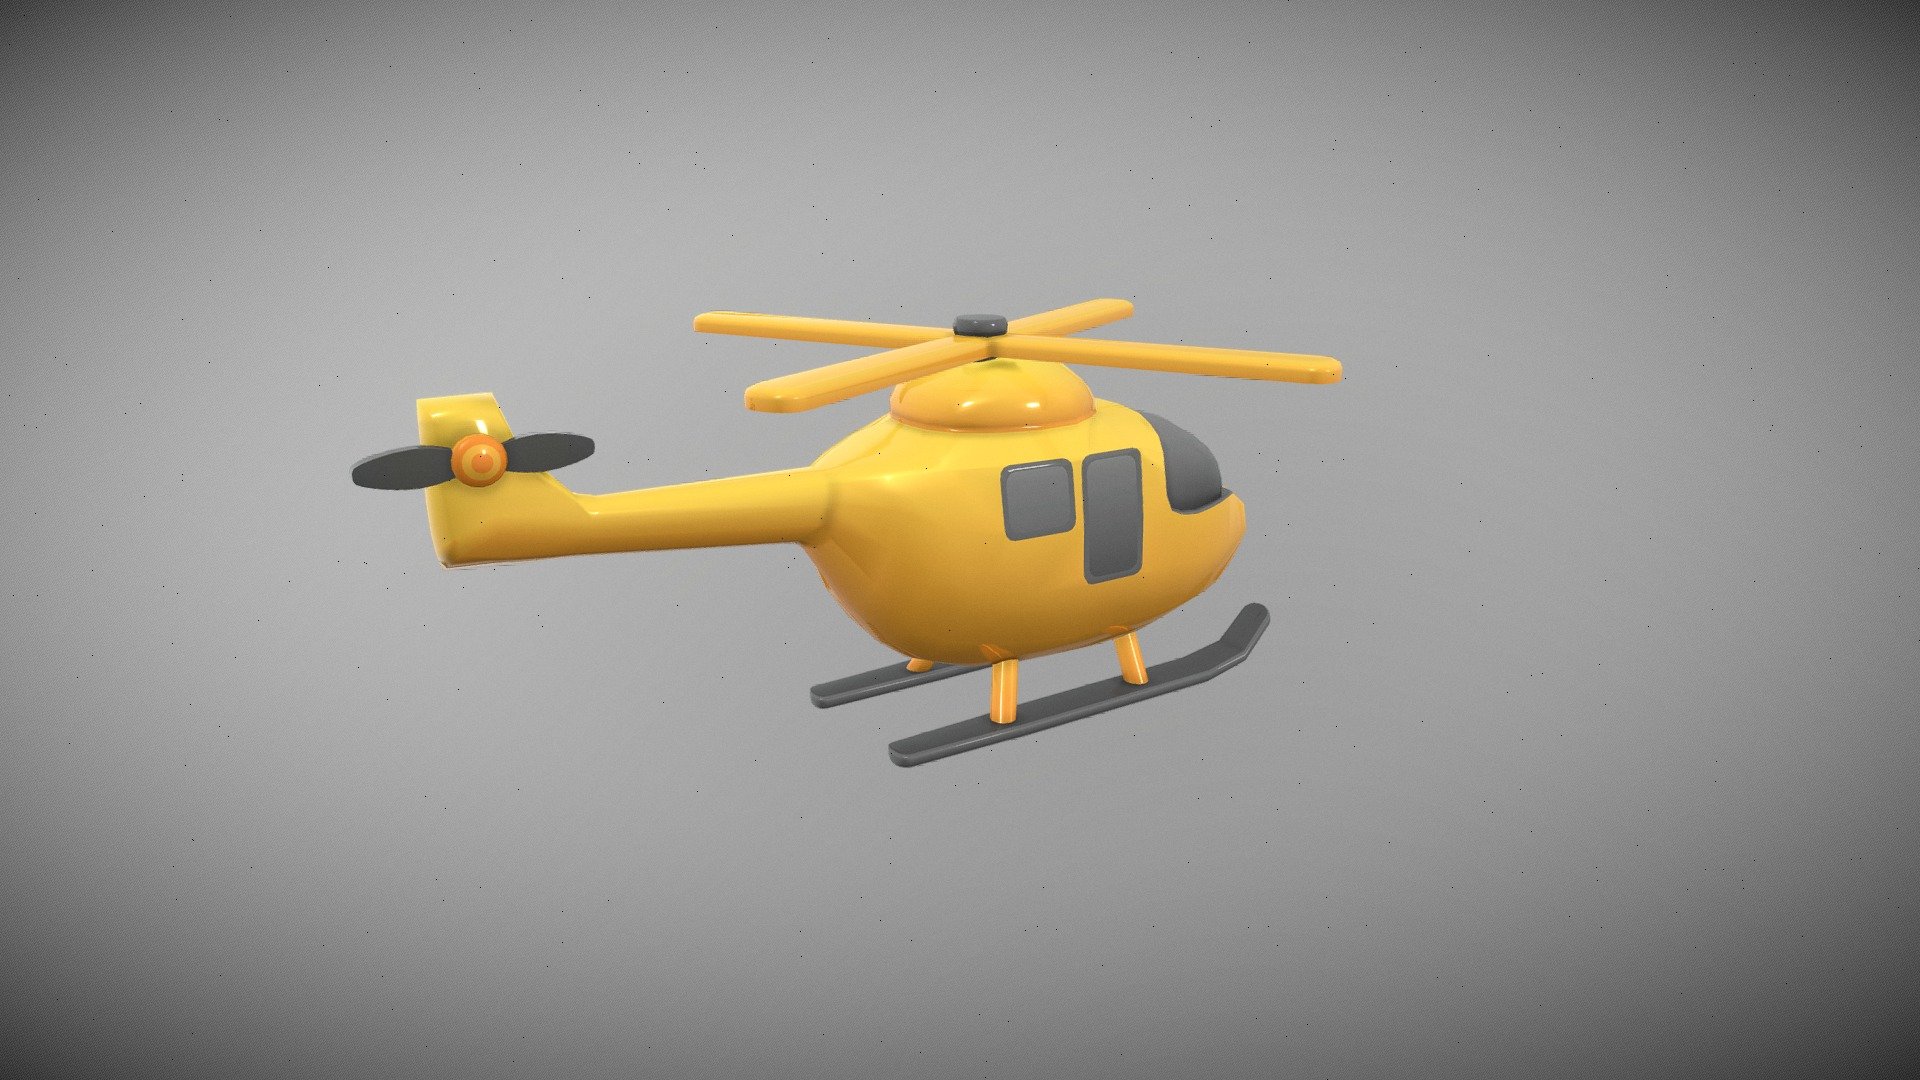 Low Poly Hyper Casual Single Textured Helicopter Model With Animations.

Modeled in 3DS MAX.
Animated In MAYA.

Contact.
Raeesdanyal@gmail.com - Hyper Casual Helicopter Animated - 3D model by Raees (@raeesdanyal) 3d model